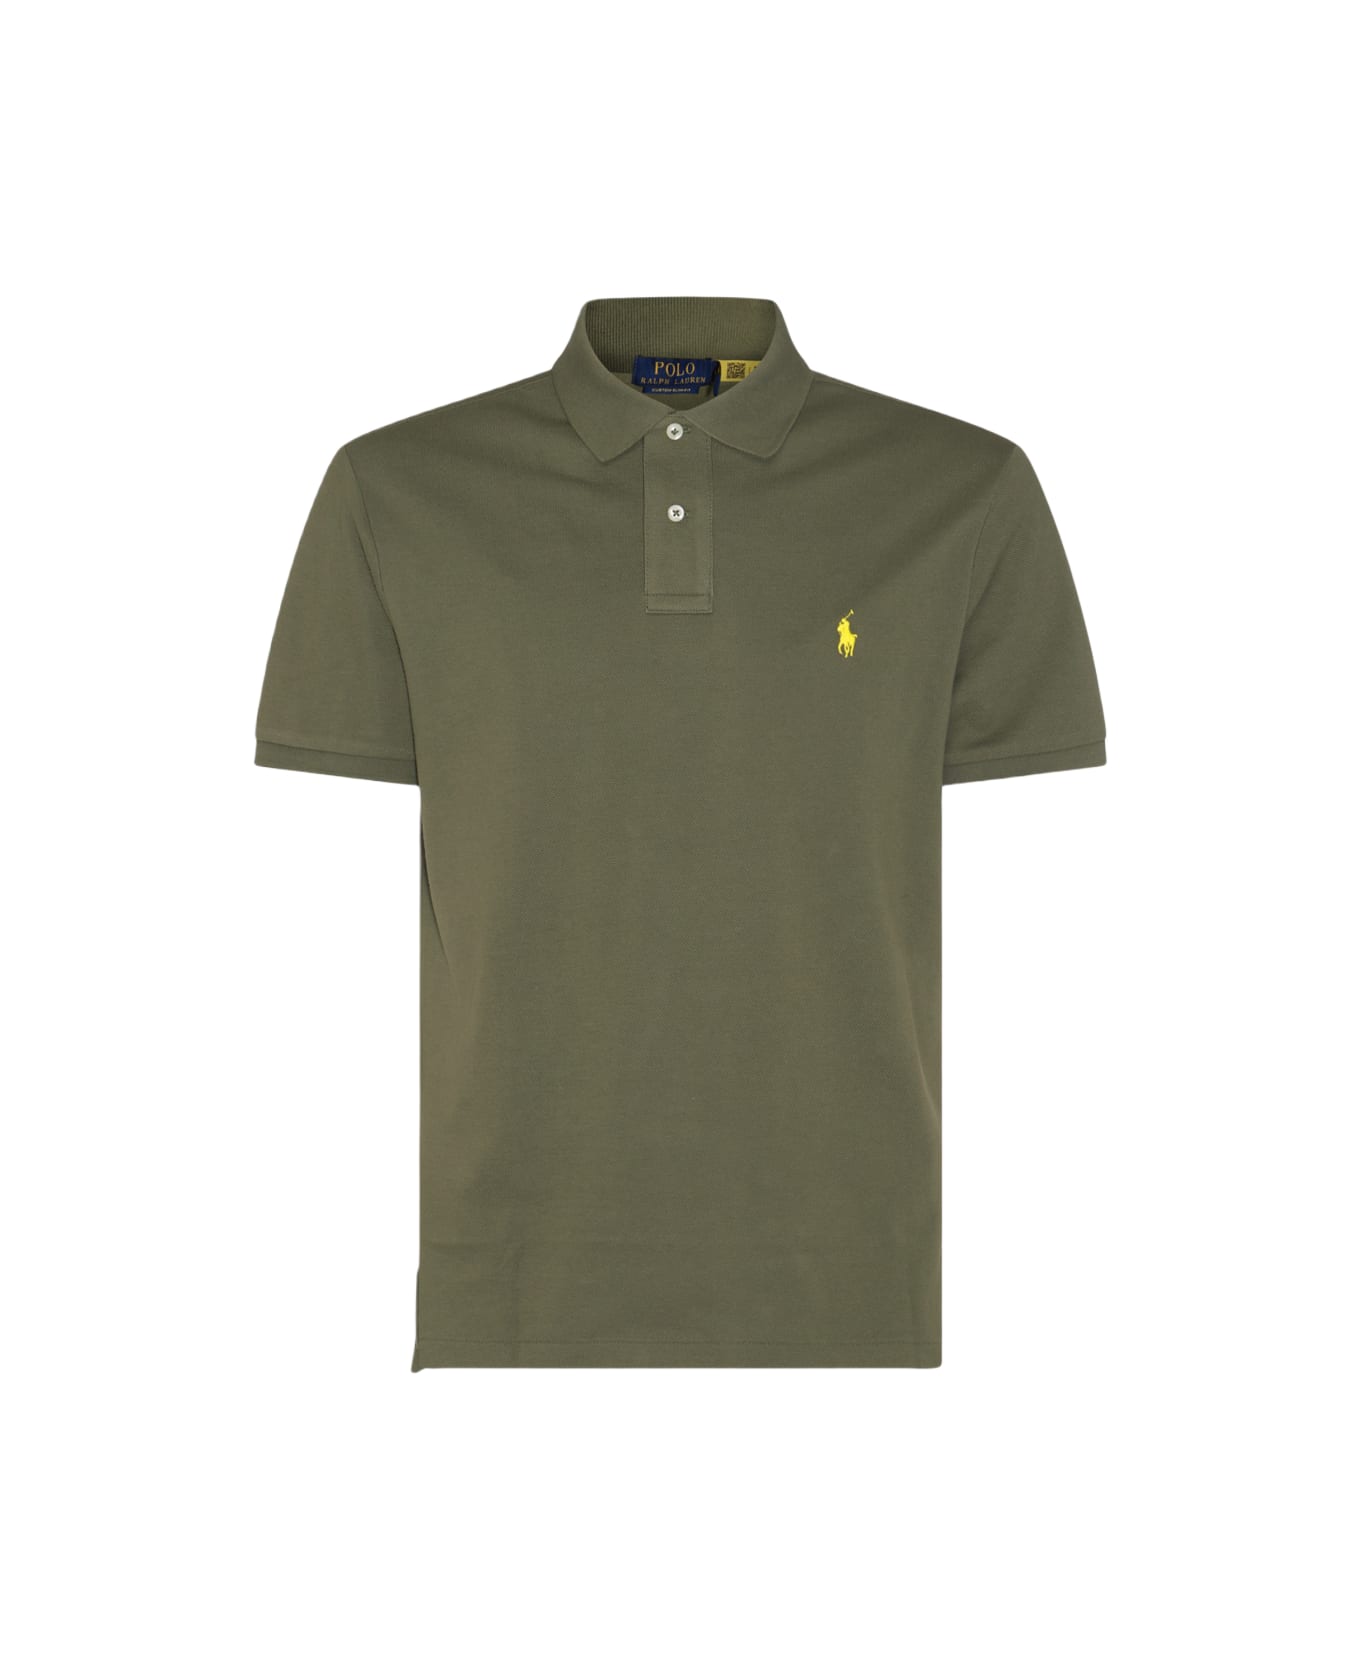 Polo Ralph Lauren Olive Green And Yellow Cotton Polo Shirt - Dark sage